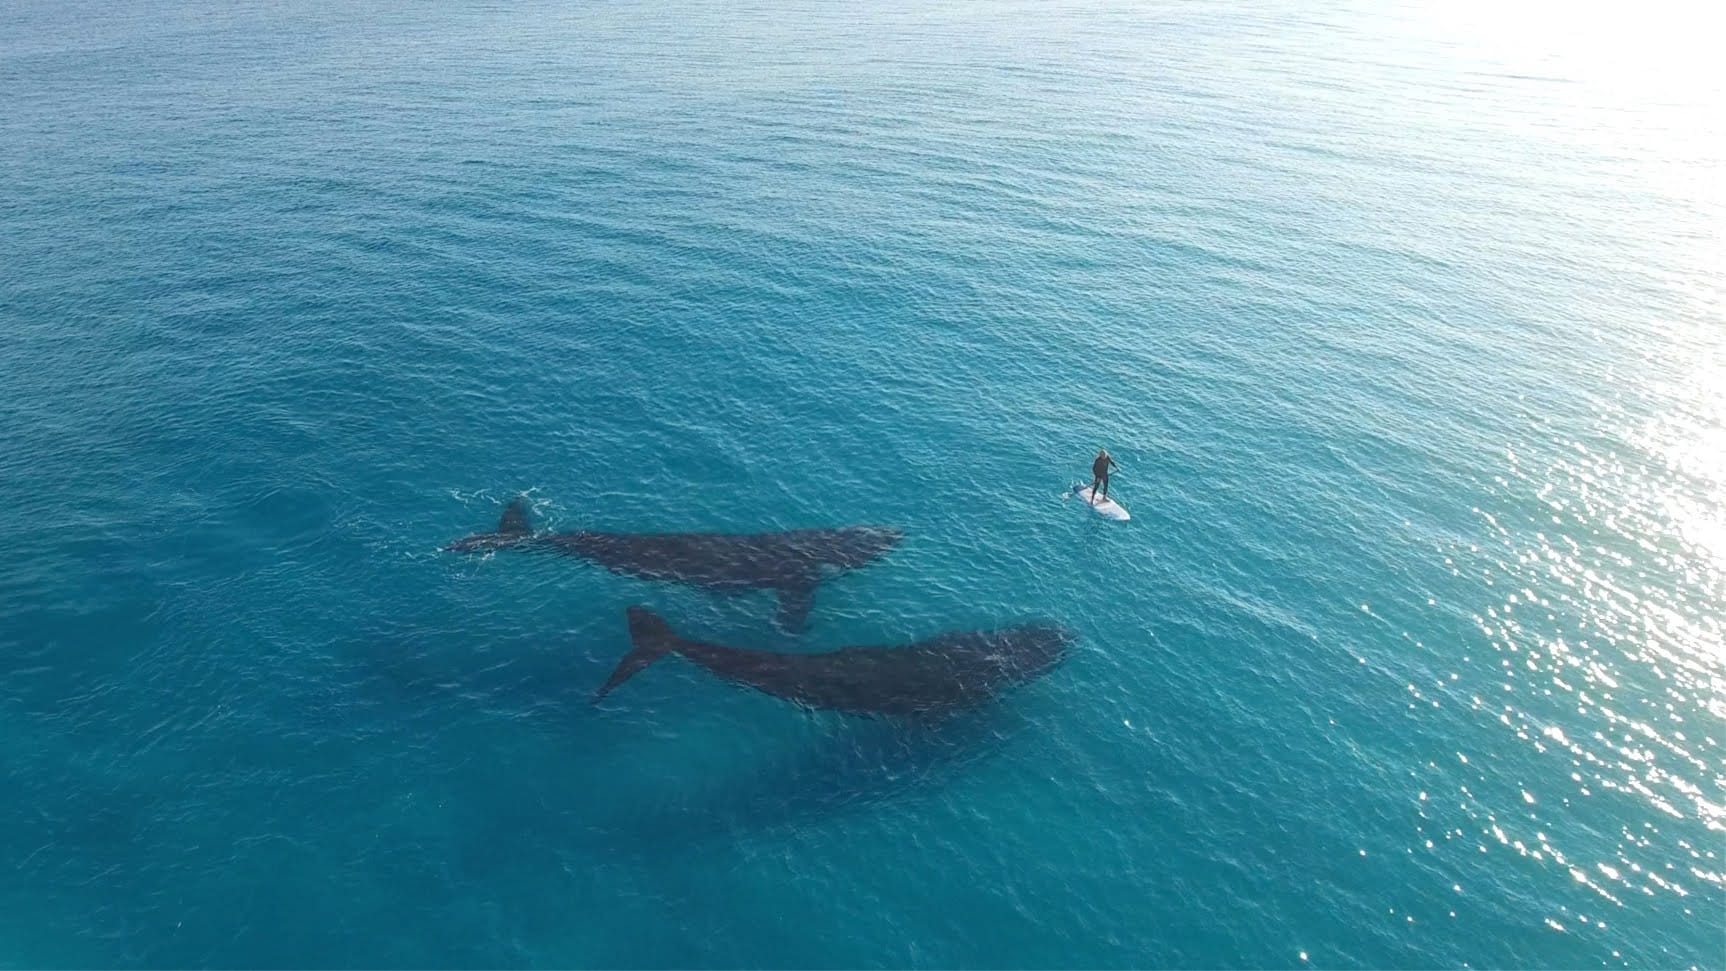 Sharing the ocean with whales